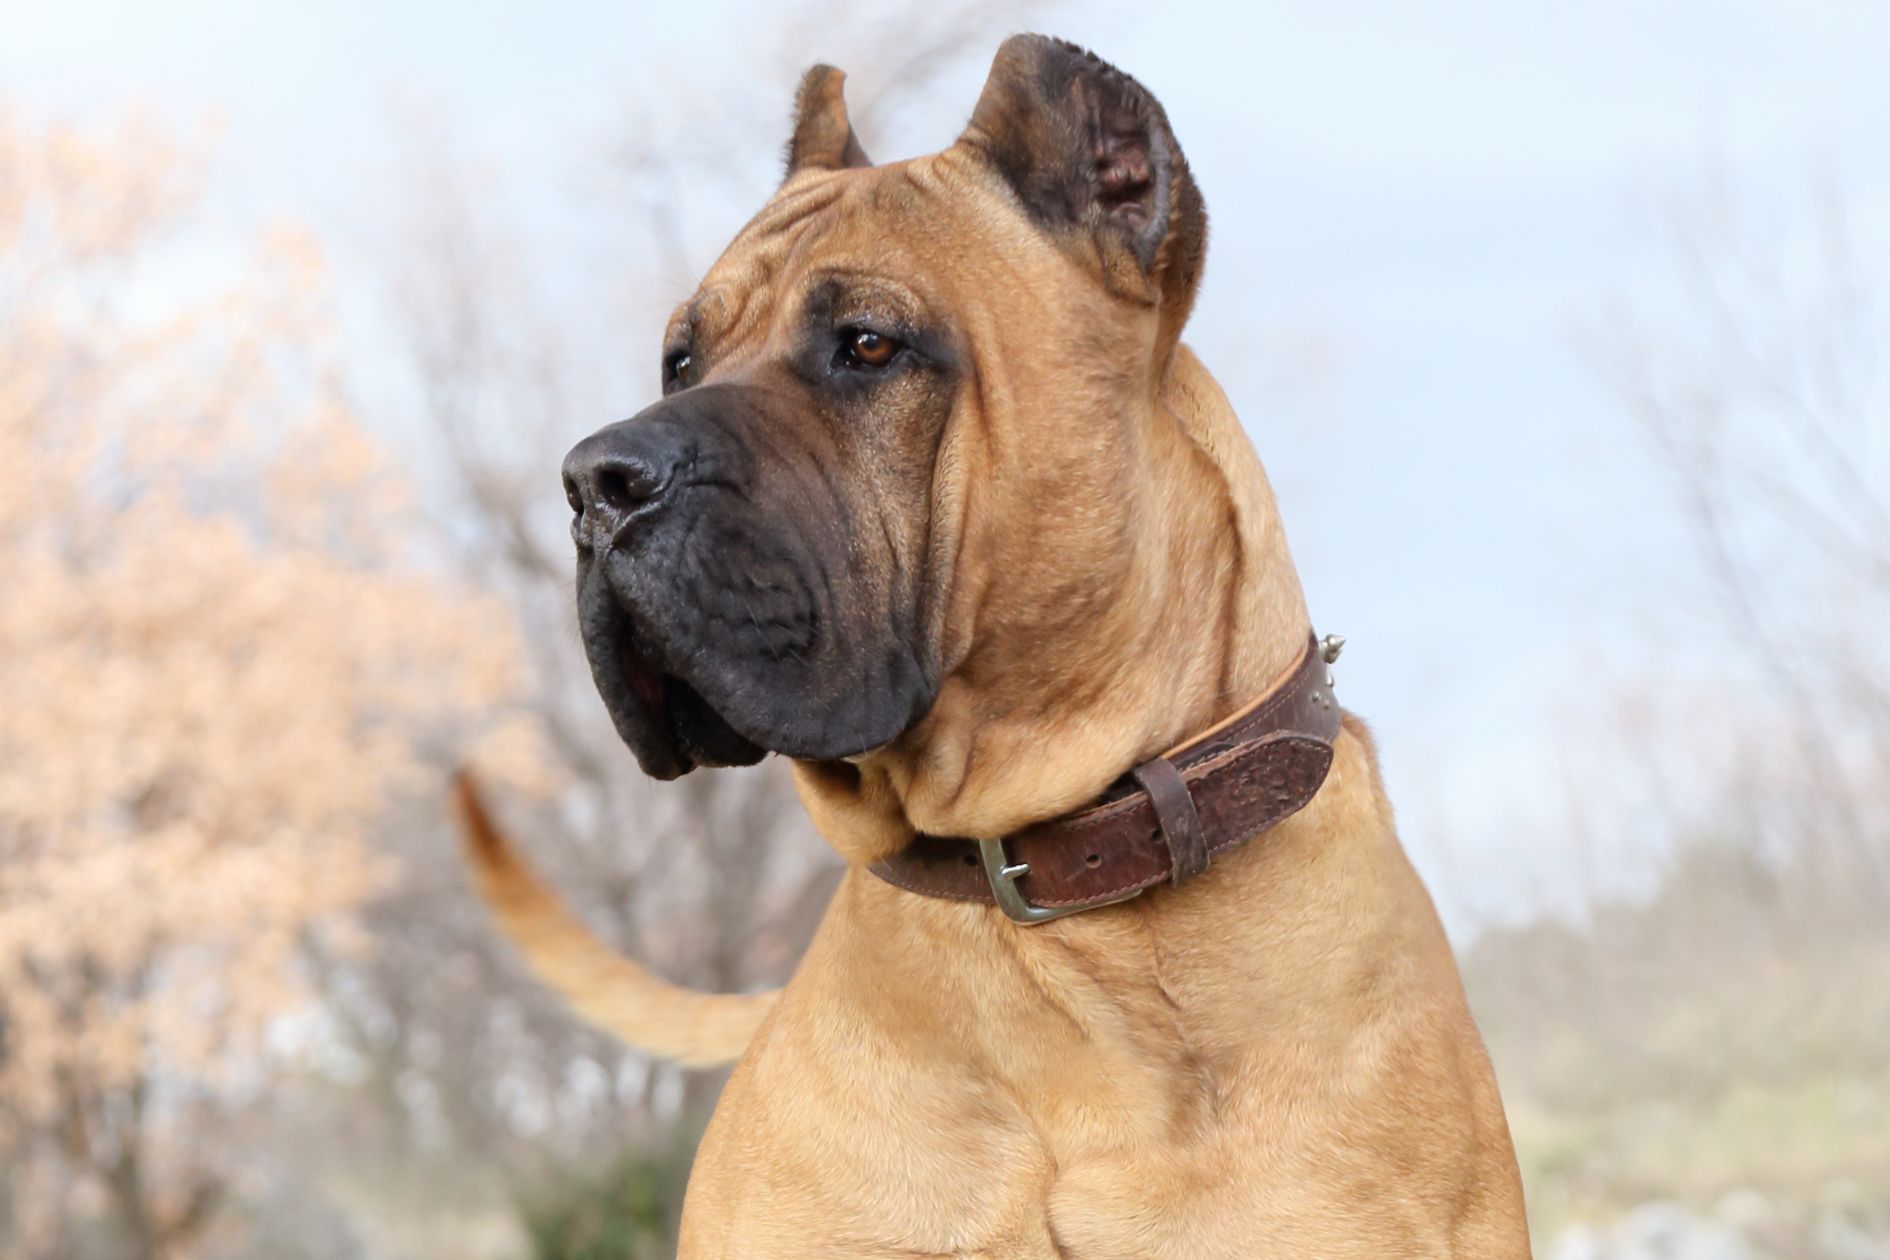 To 5 Questions you ask for Presa Canario dog